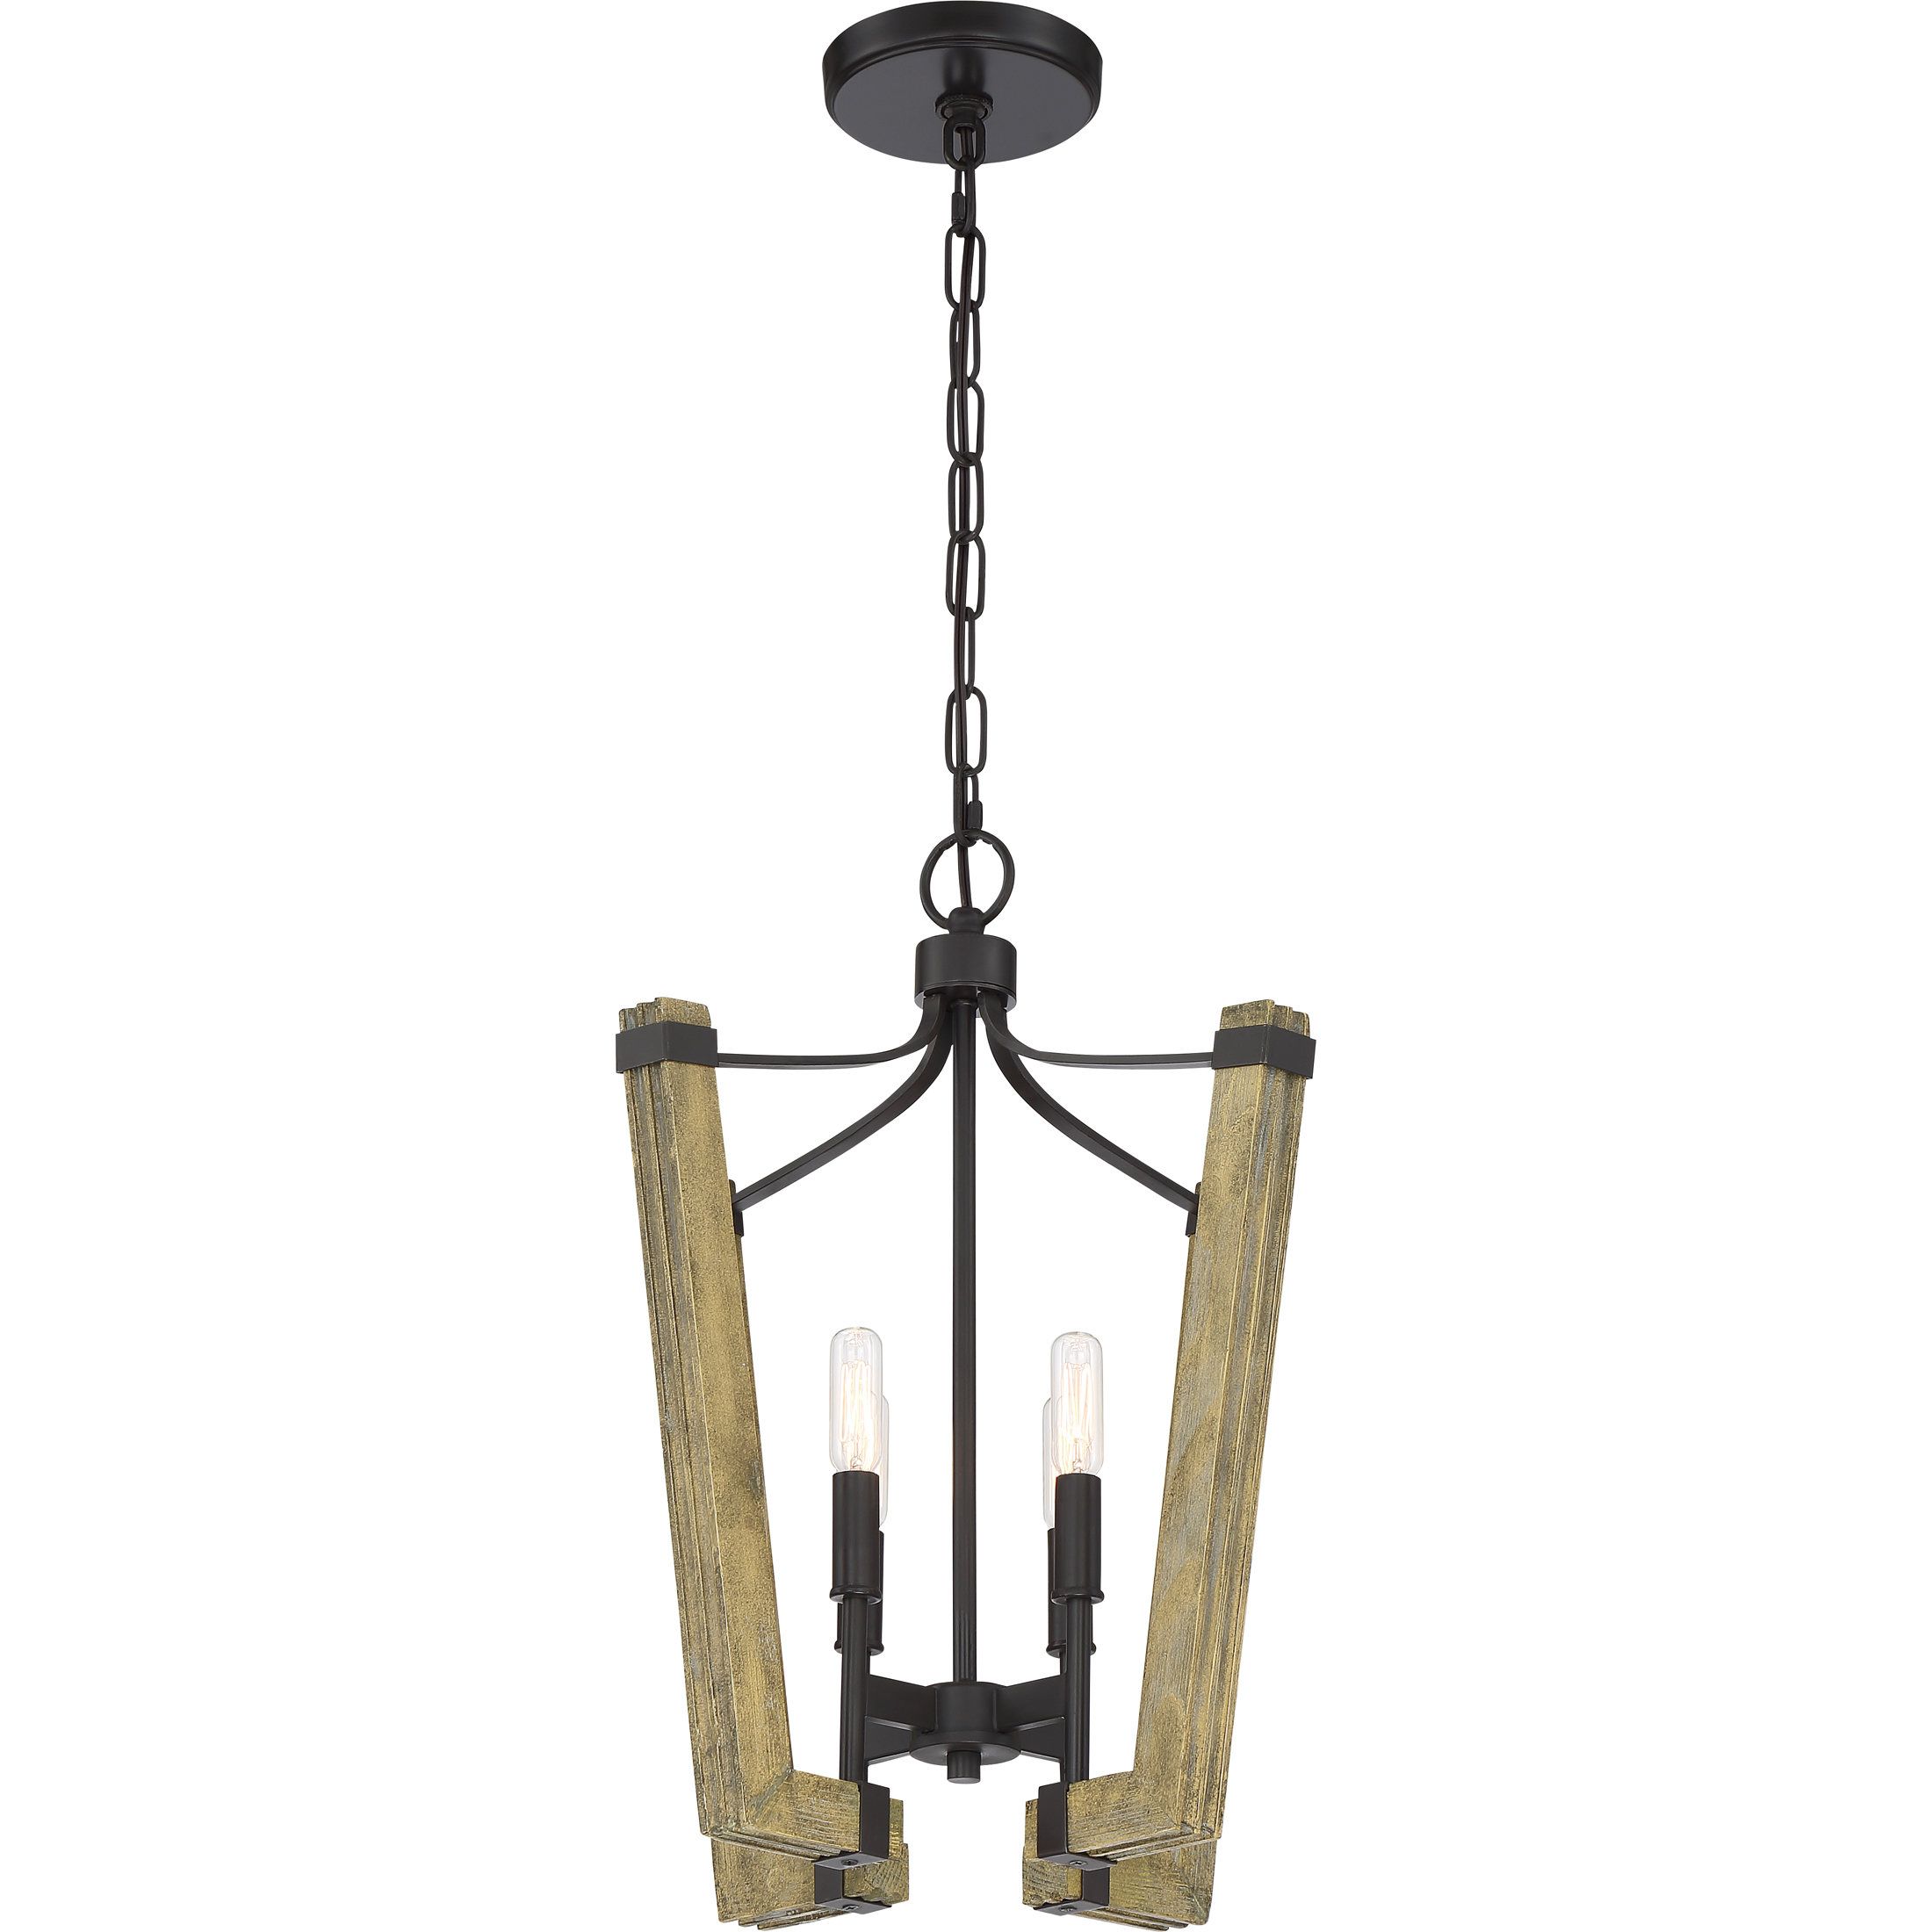 Thom 4 Light Candle Style Chandelier With Regard To Bennington 4 Light Candle Style Chandeliers (Photo 15 of 30)